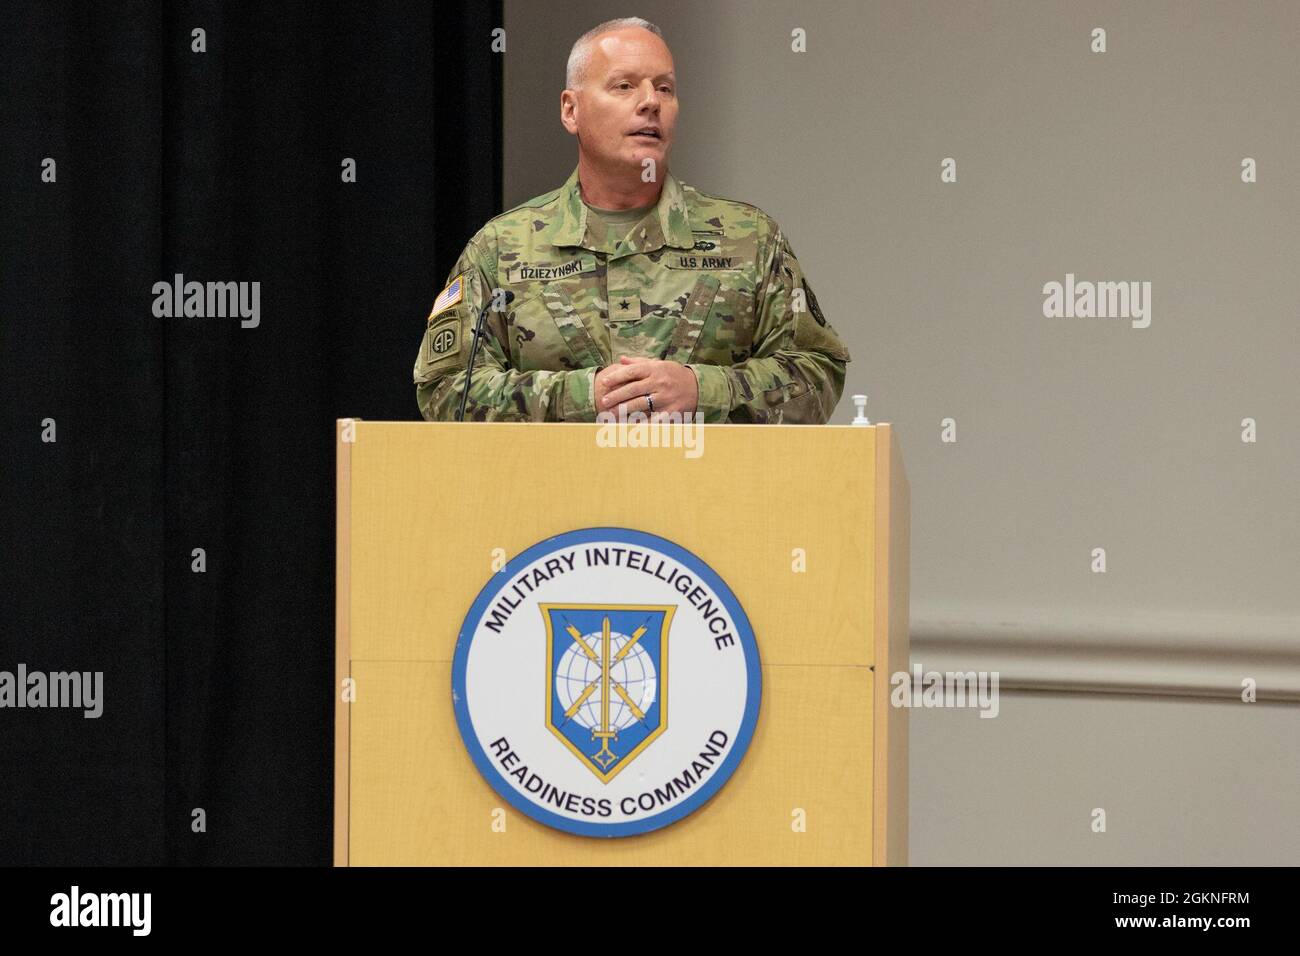 Military Intelligence Readiness Command (MIRC) Commanding General Brig. Gen. Joseph Dziezynski gives his remarks during the MIRC's assumption of command ceremony, Fort Belvoir, Virginia, June 5, 2021. Stock Photo